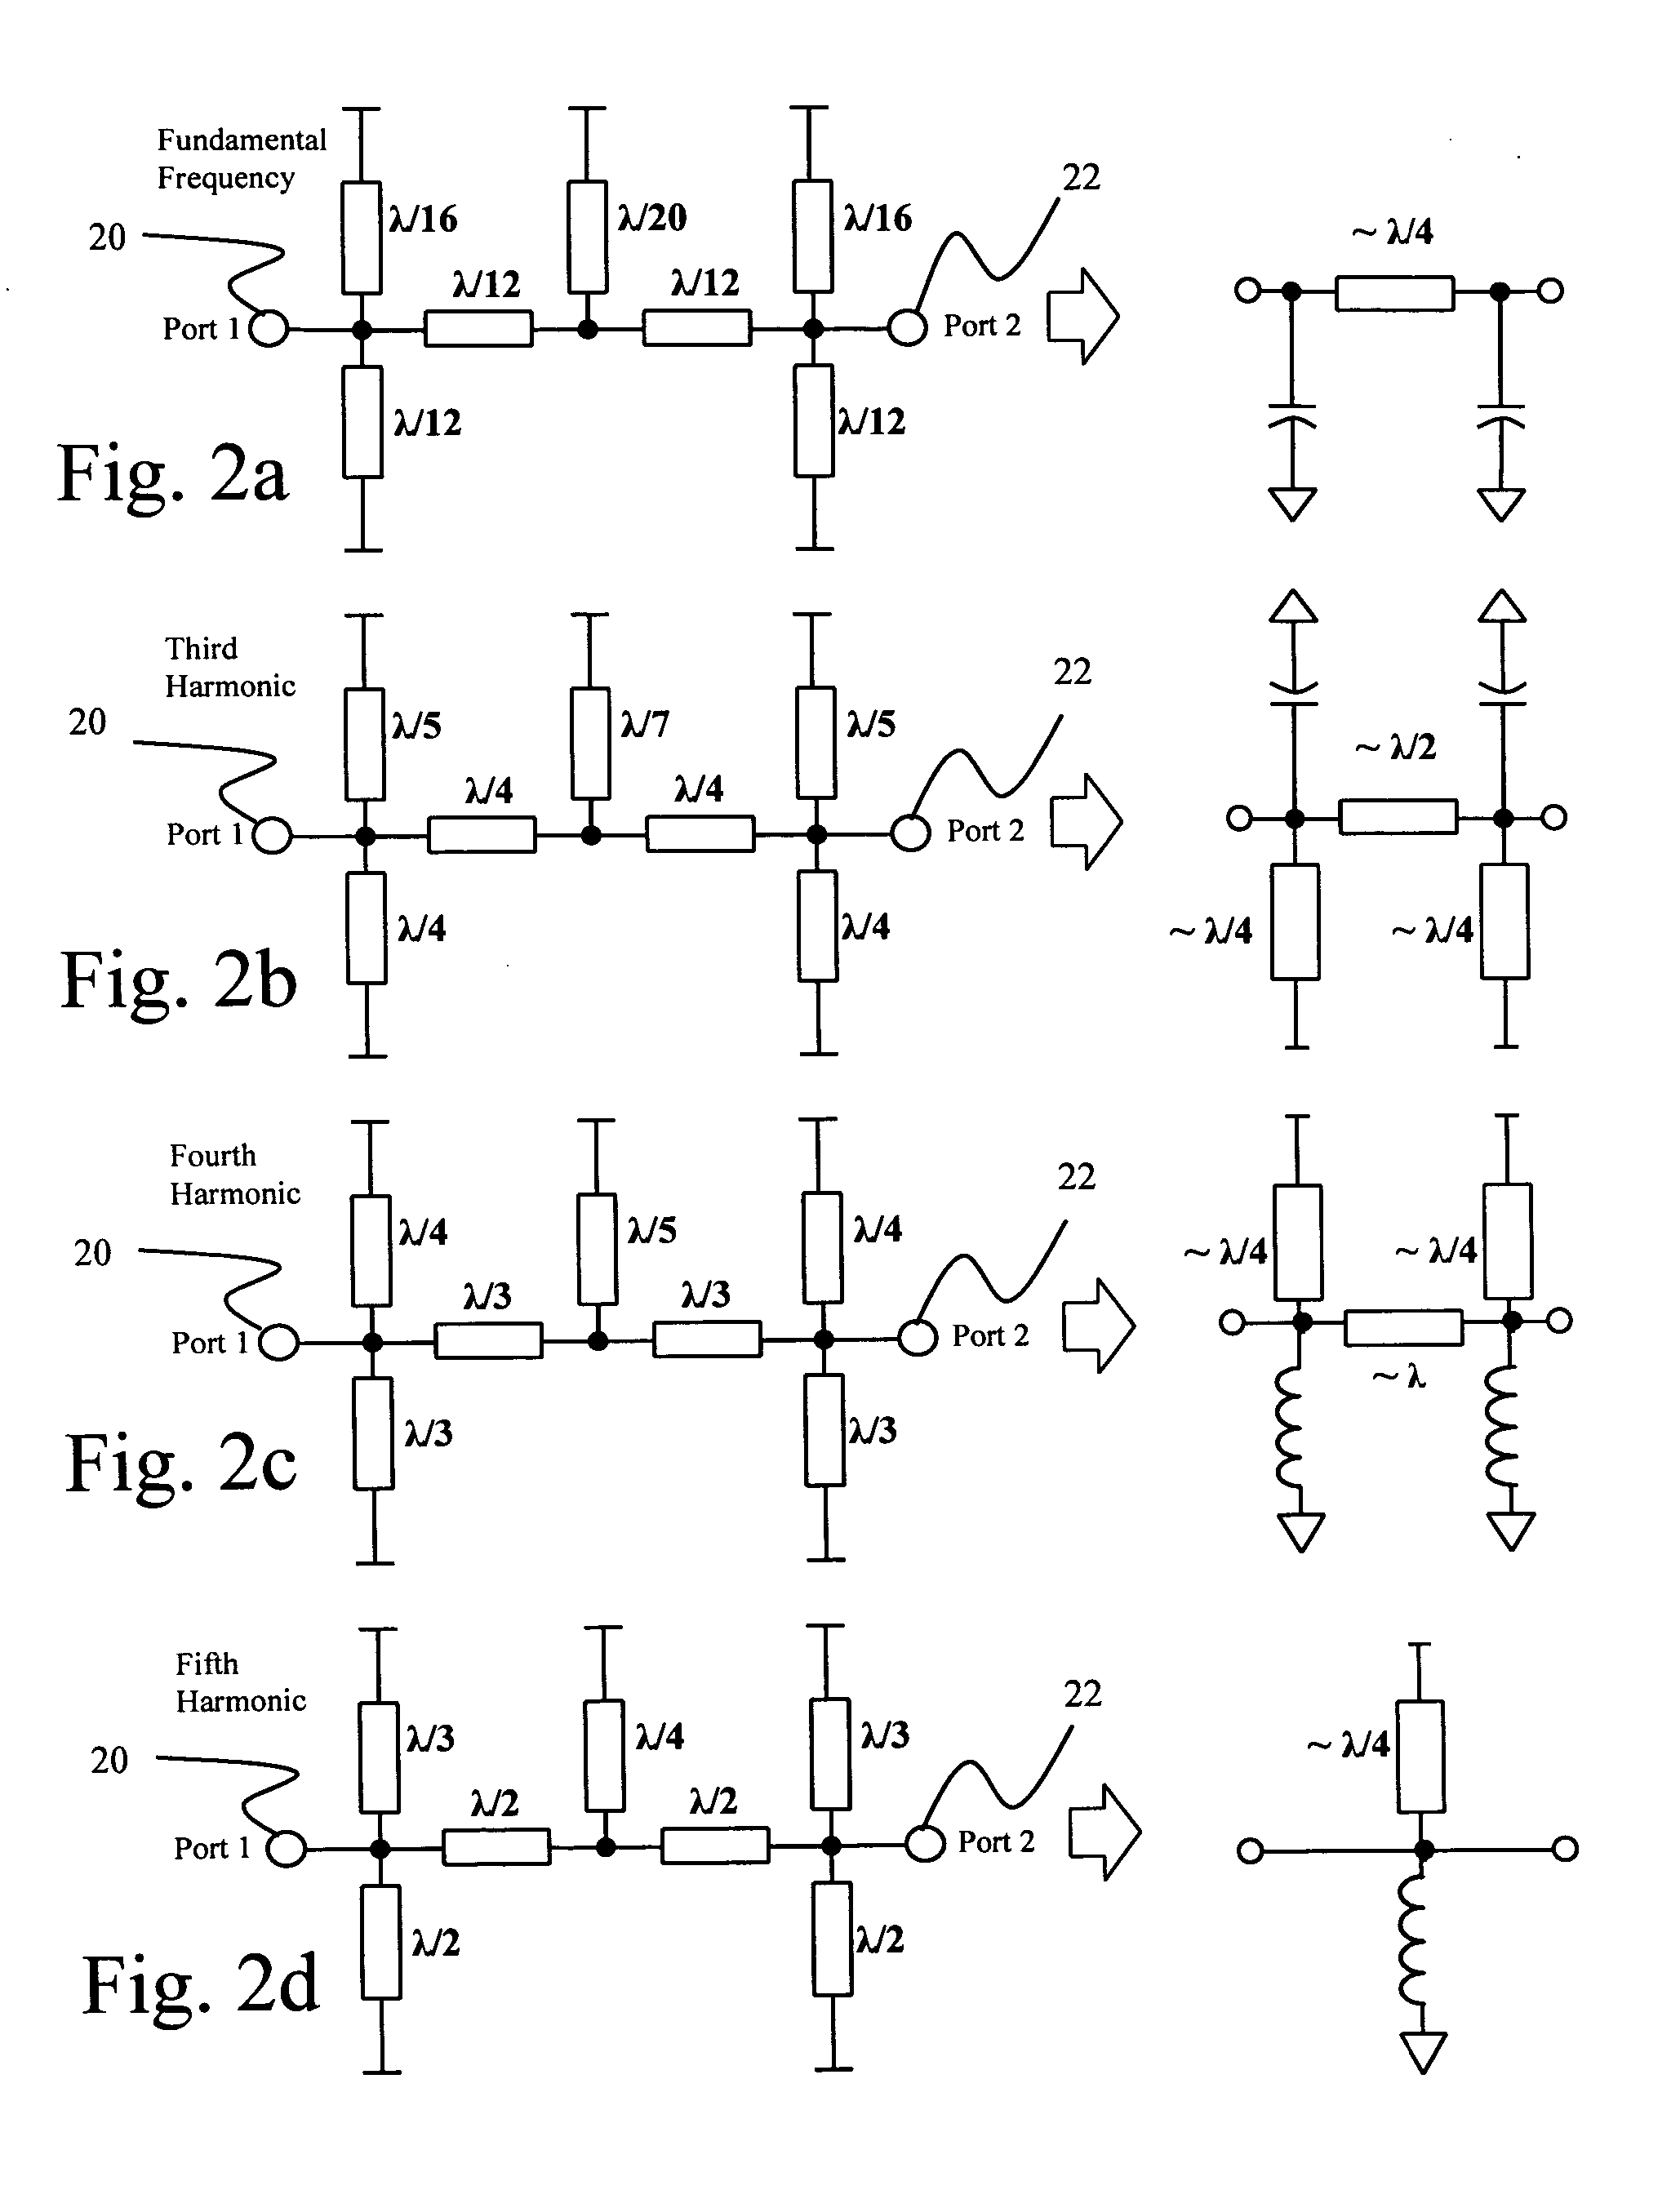 Embedded antenna and filter apparatus and methodology